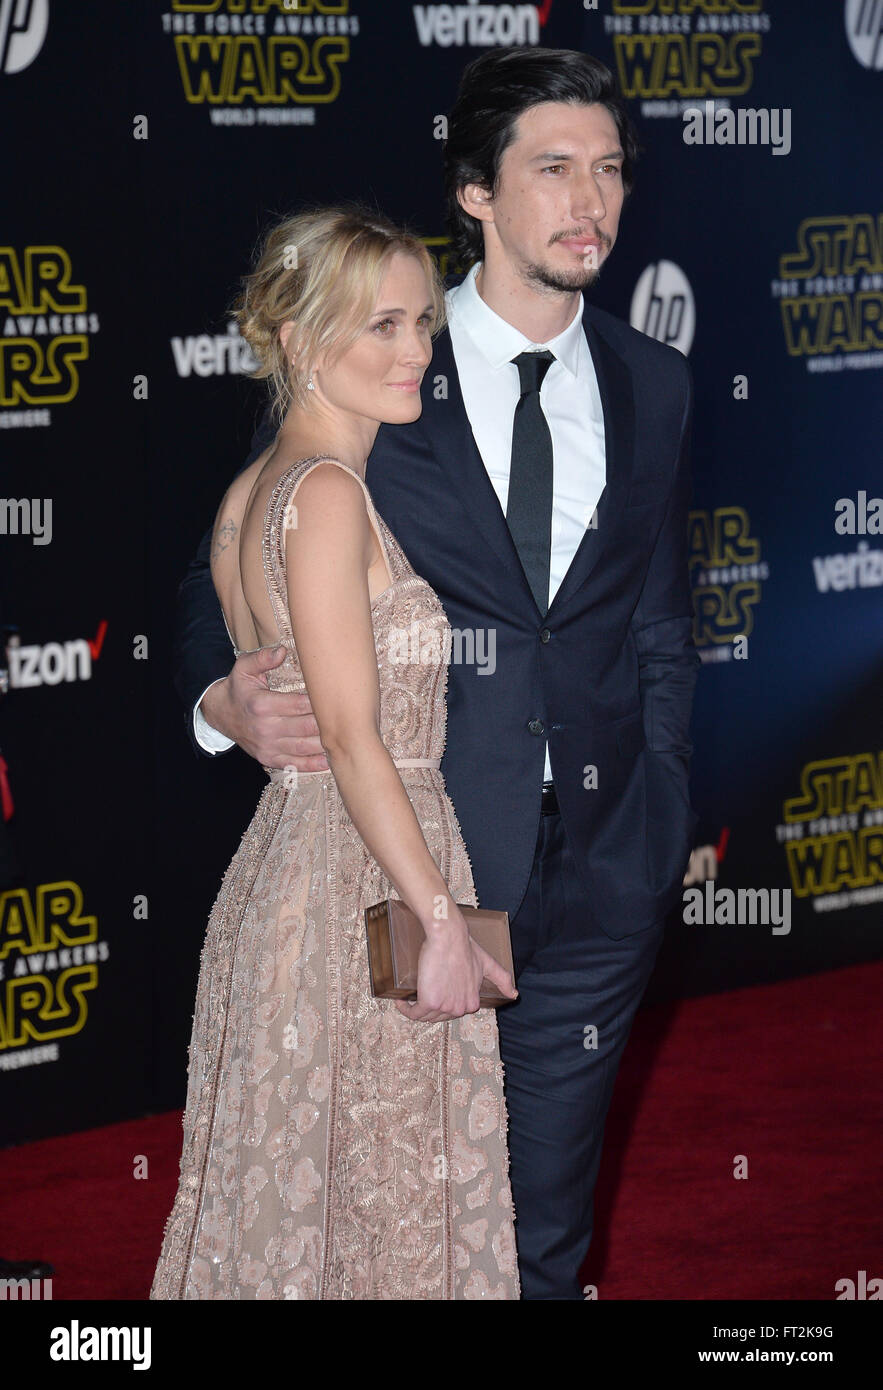 LOS ANGELES, CA - DECEMBER 14, 2015: Actor Adam Driver & wife Joanne Tucker at the world premiere of 'Star Wars: The Force Awakens' on Hollywood Boulevard Stock Photo